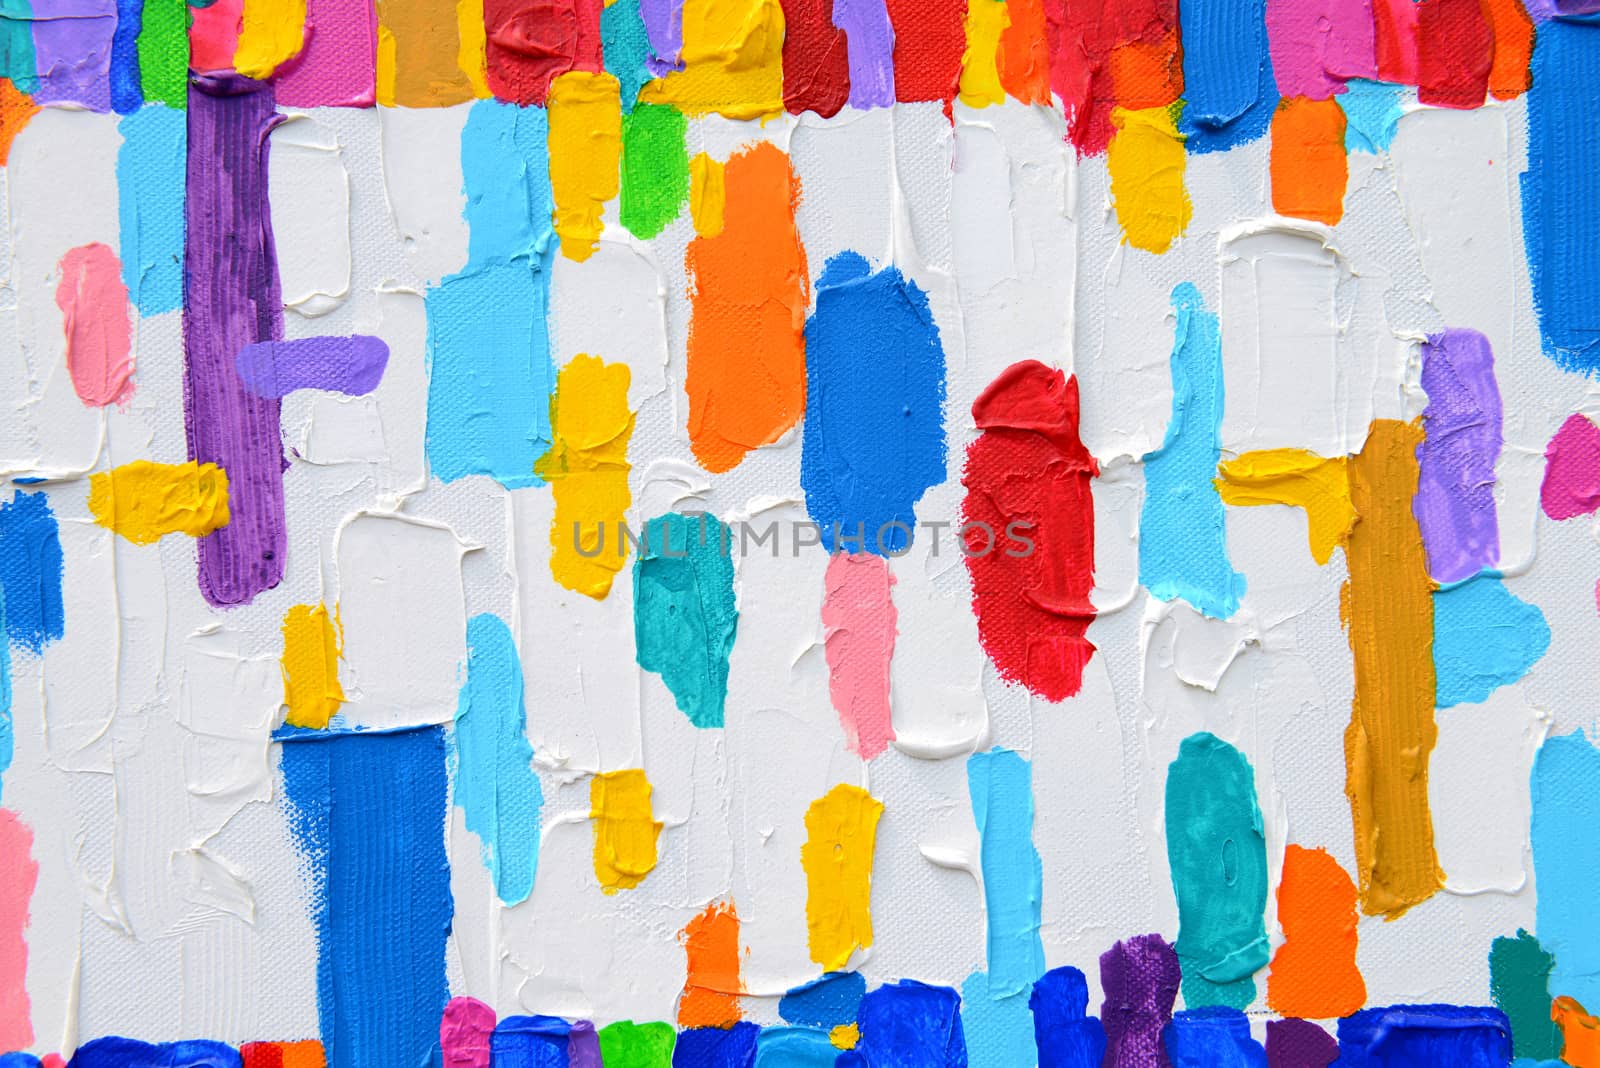 Texture, background and Colorful Image of an original Abstract Painting on Canvas.